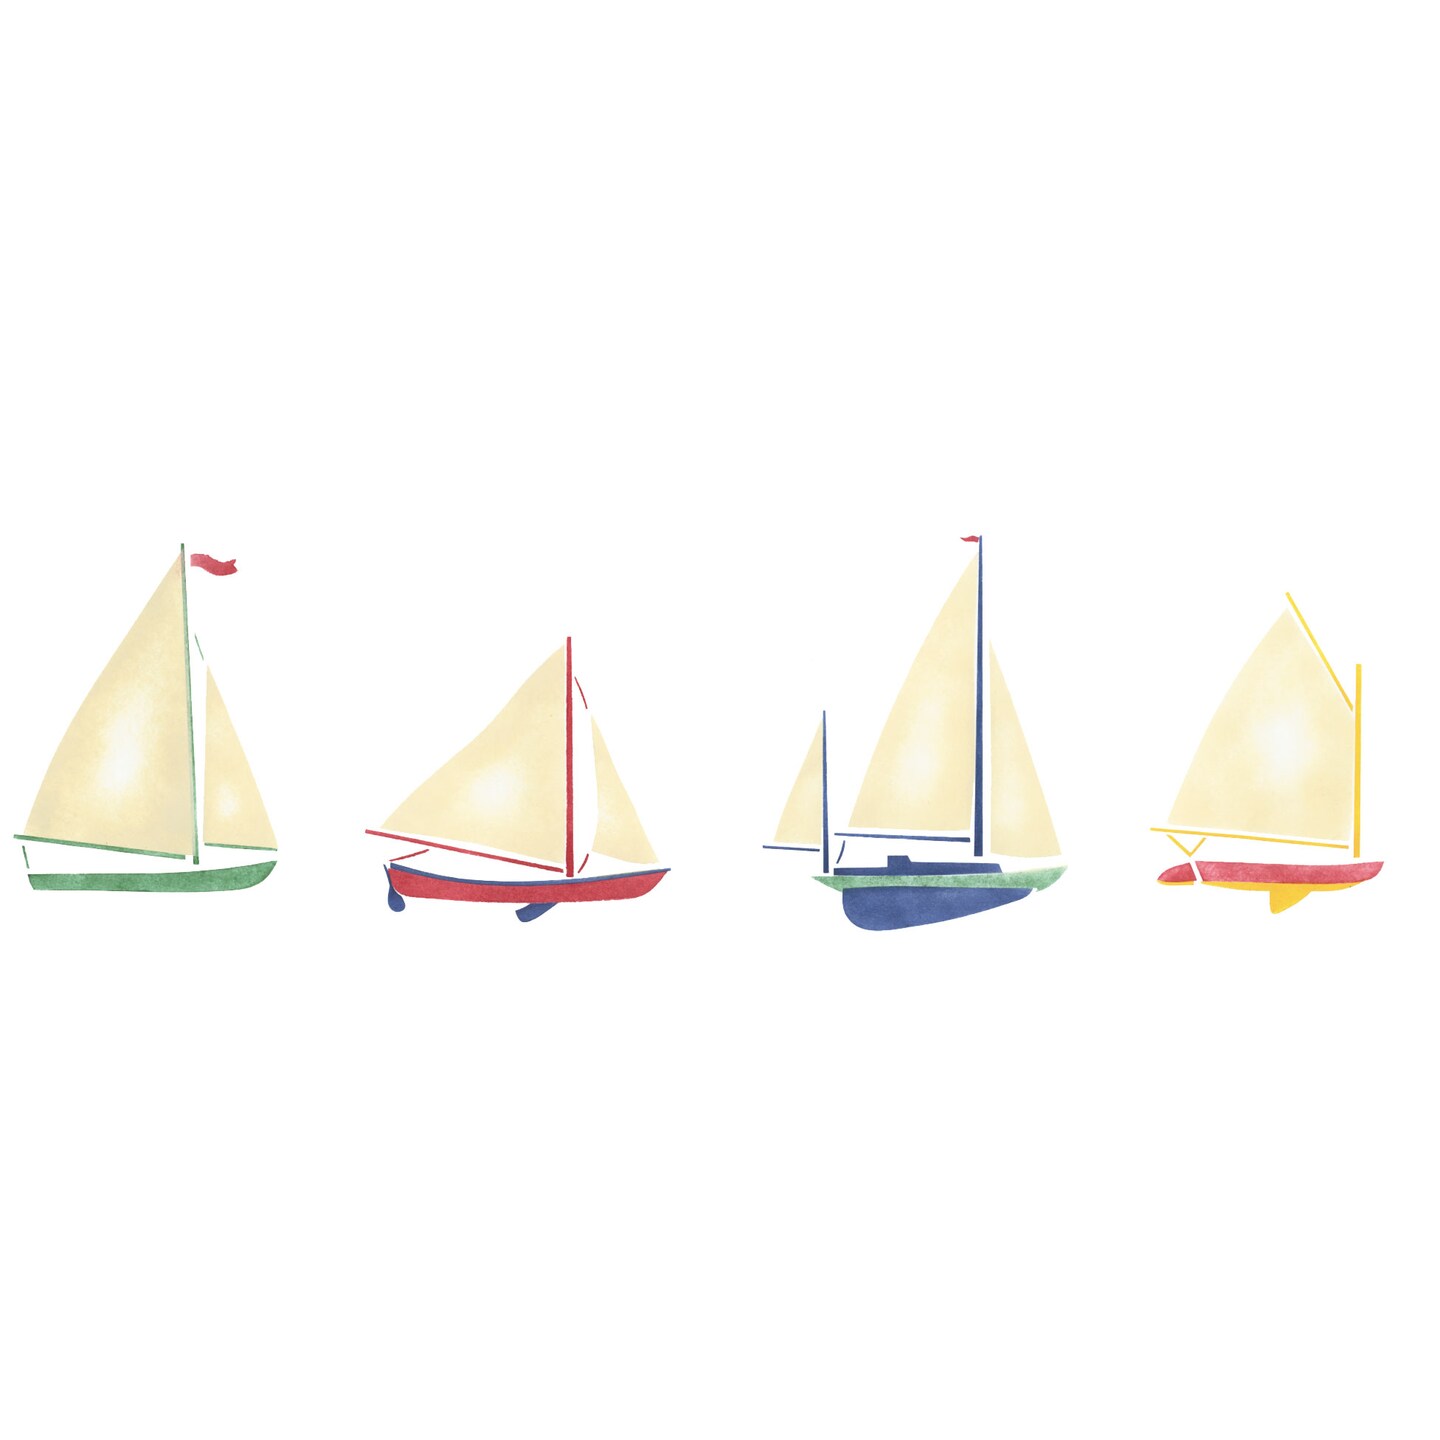 Sailboat Wall Stencil | Outdoor Stencils | Reusable Art Craft Stencils for Painting on Walls, Canvas, Wood | Reusable Plastic Paint Stencil for Home Makeover | Easy to Use &#x26; Clean Art Stencil | 1131 by Designer Stencils